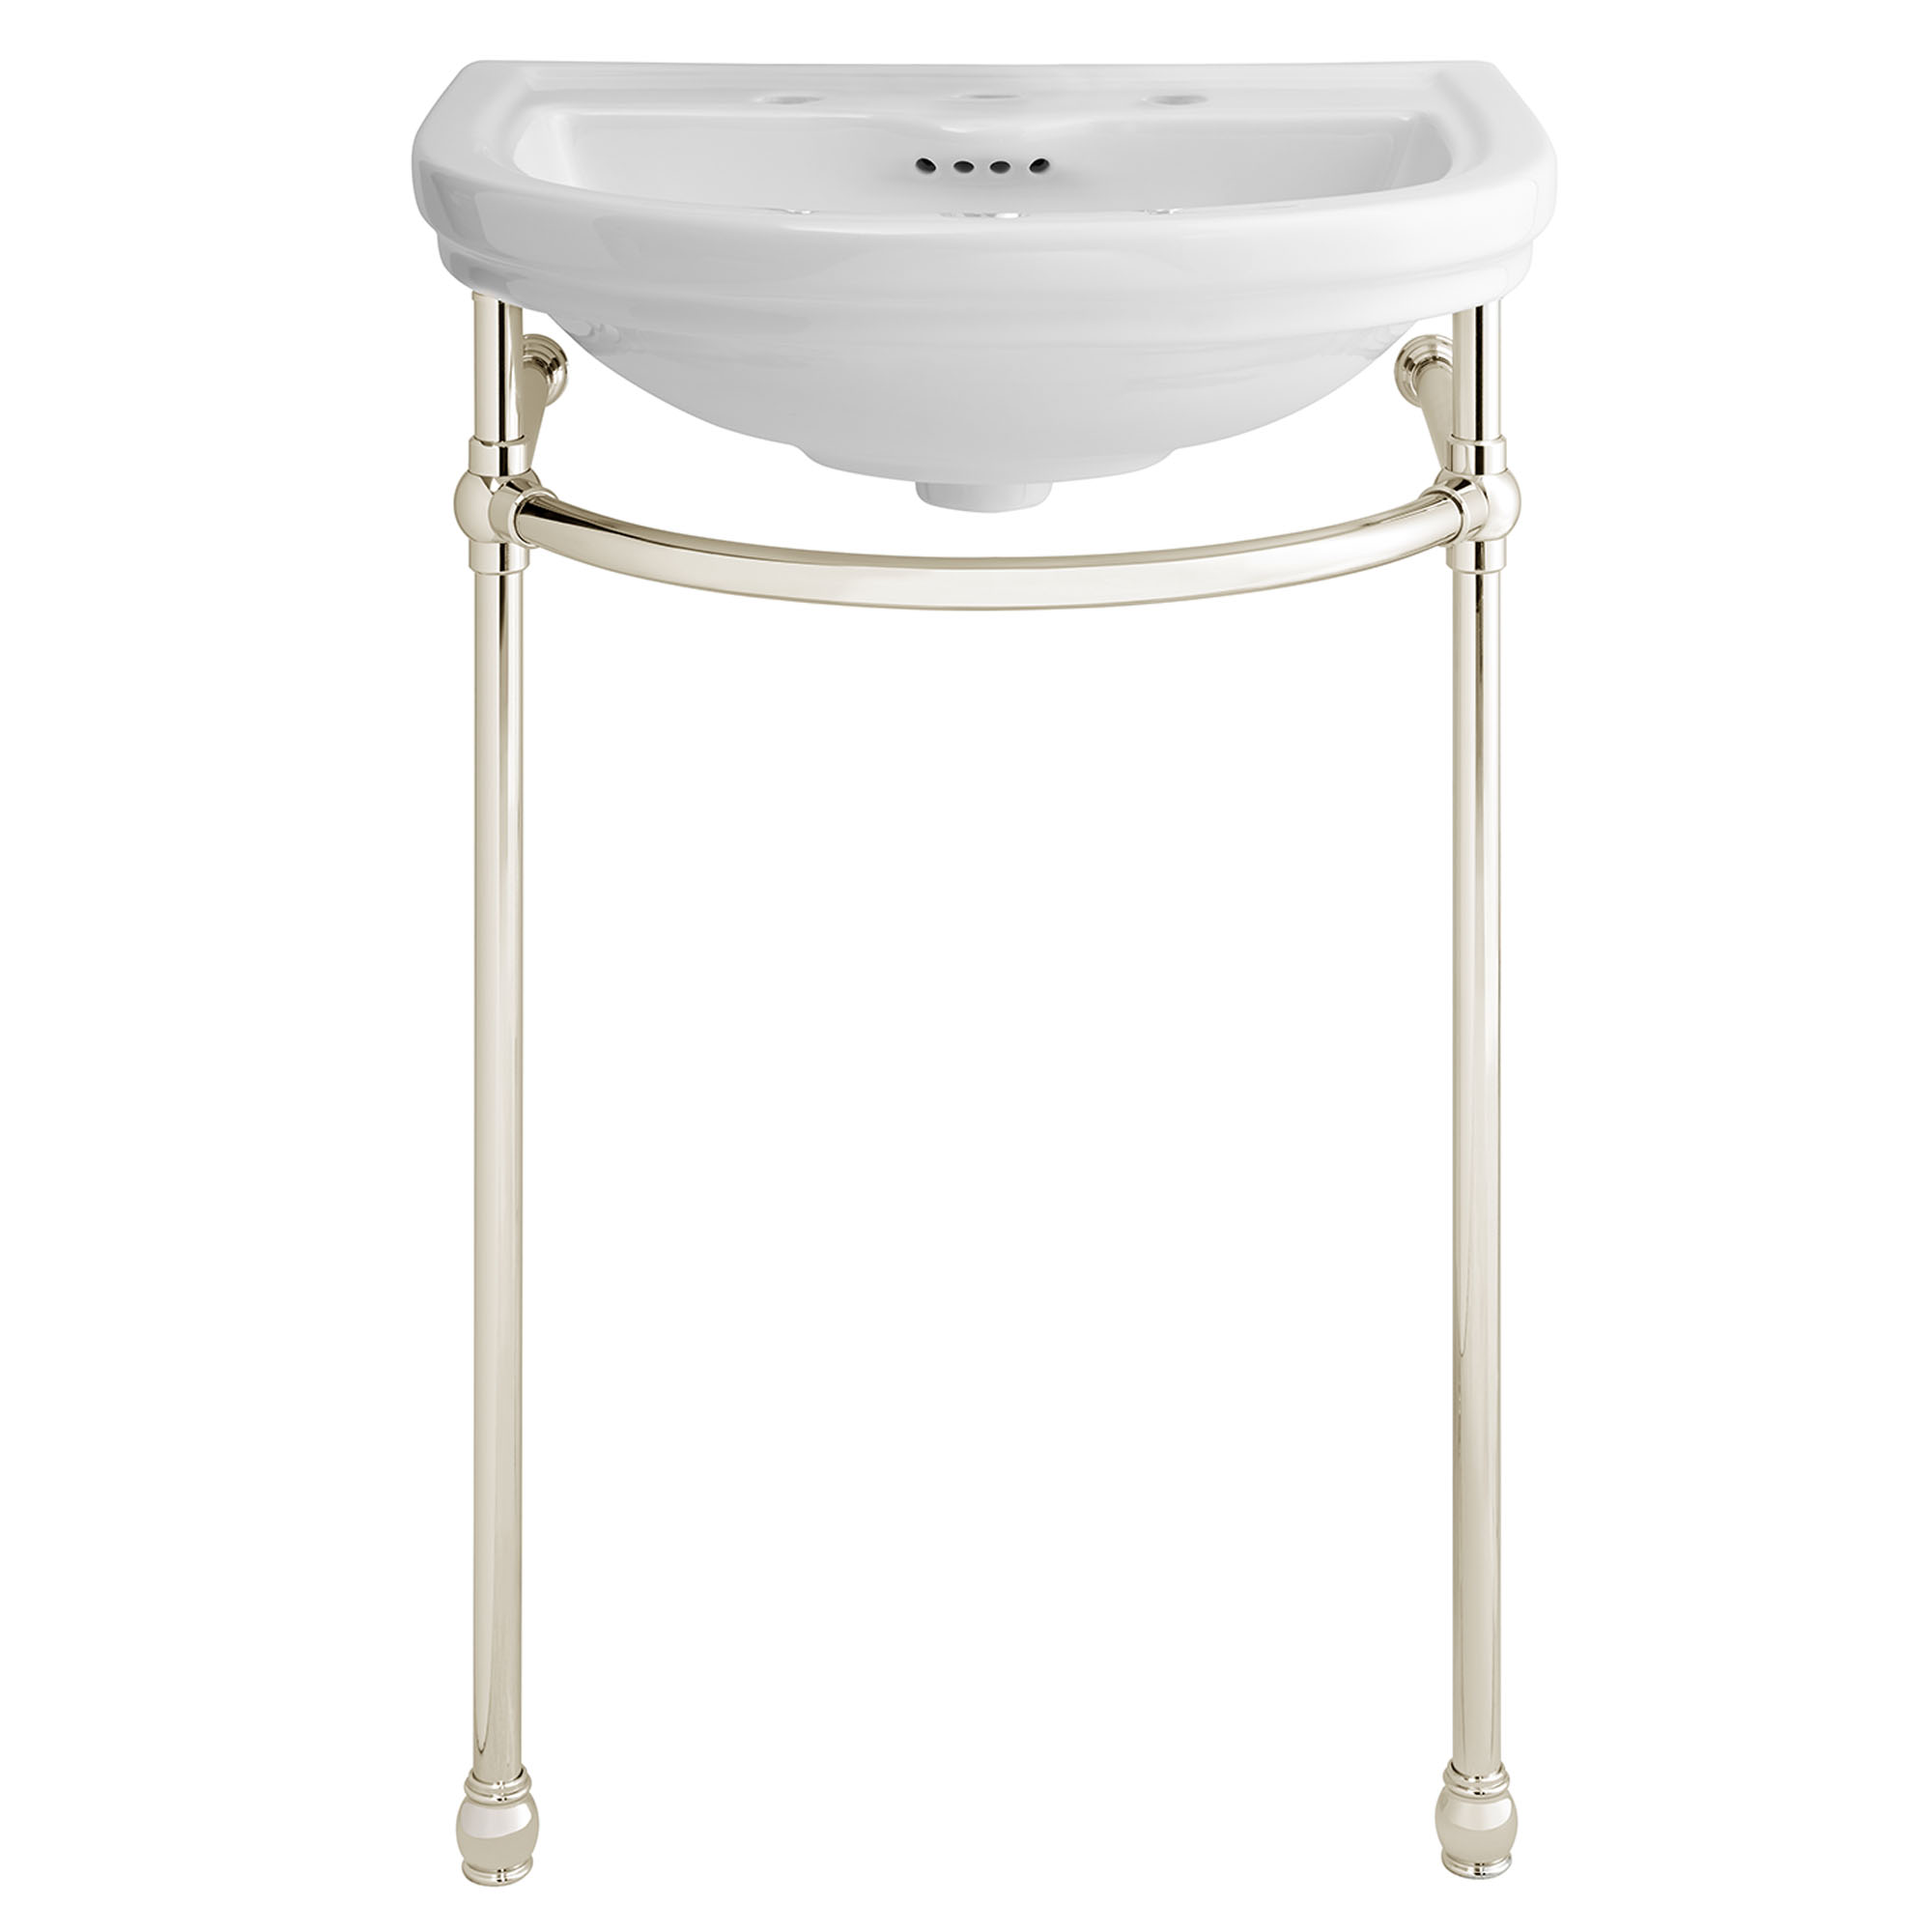 St. George® 24 in. Console Bathroom Sink, 3 Hole with Console Leg